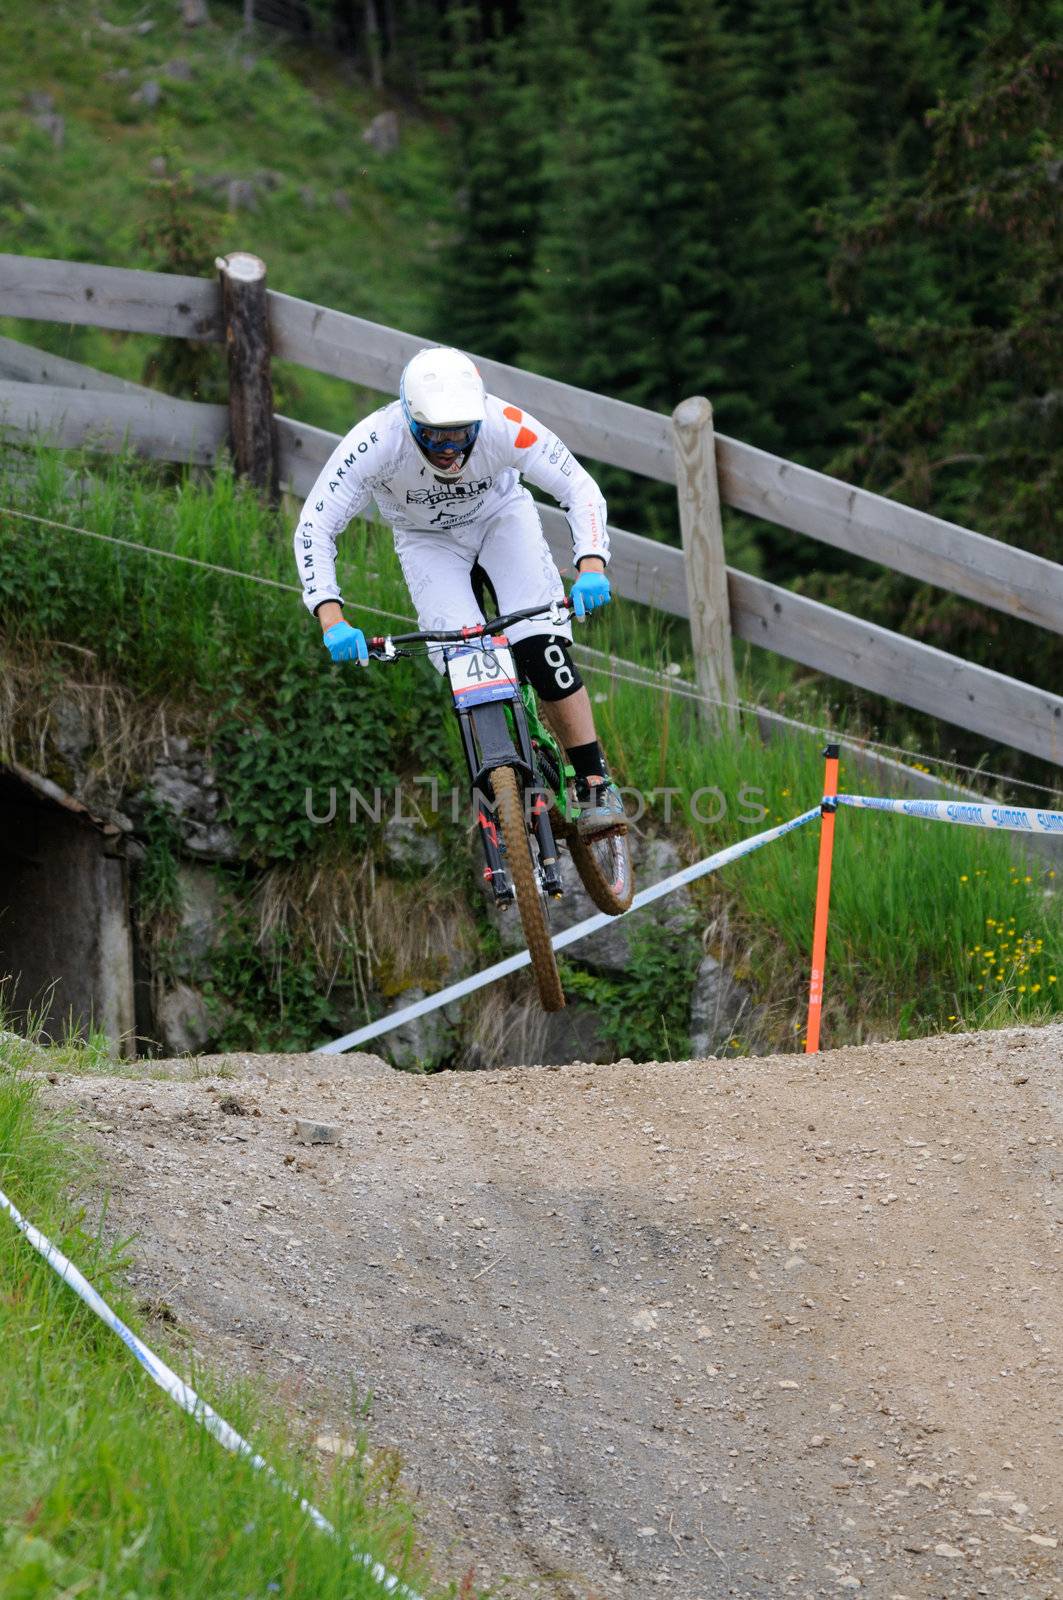 LEOGANG, AUSTRIA - JUN 12: UCI Mountain bike world cup. Sam Dale (GBR) at the downhill final race on June 12, 2011 in Leogang, Austria.